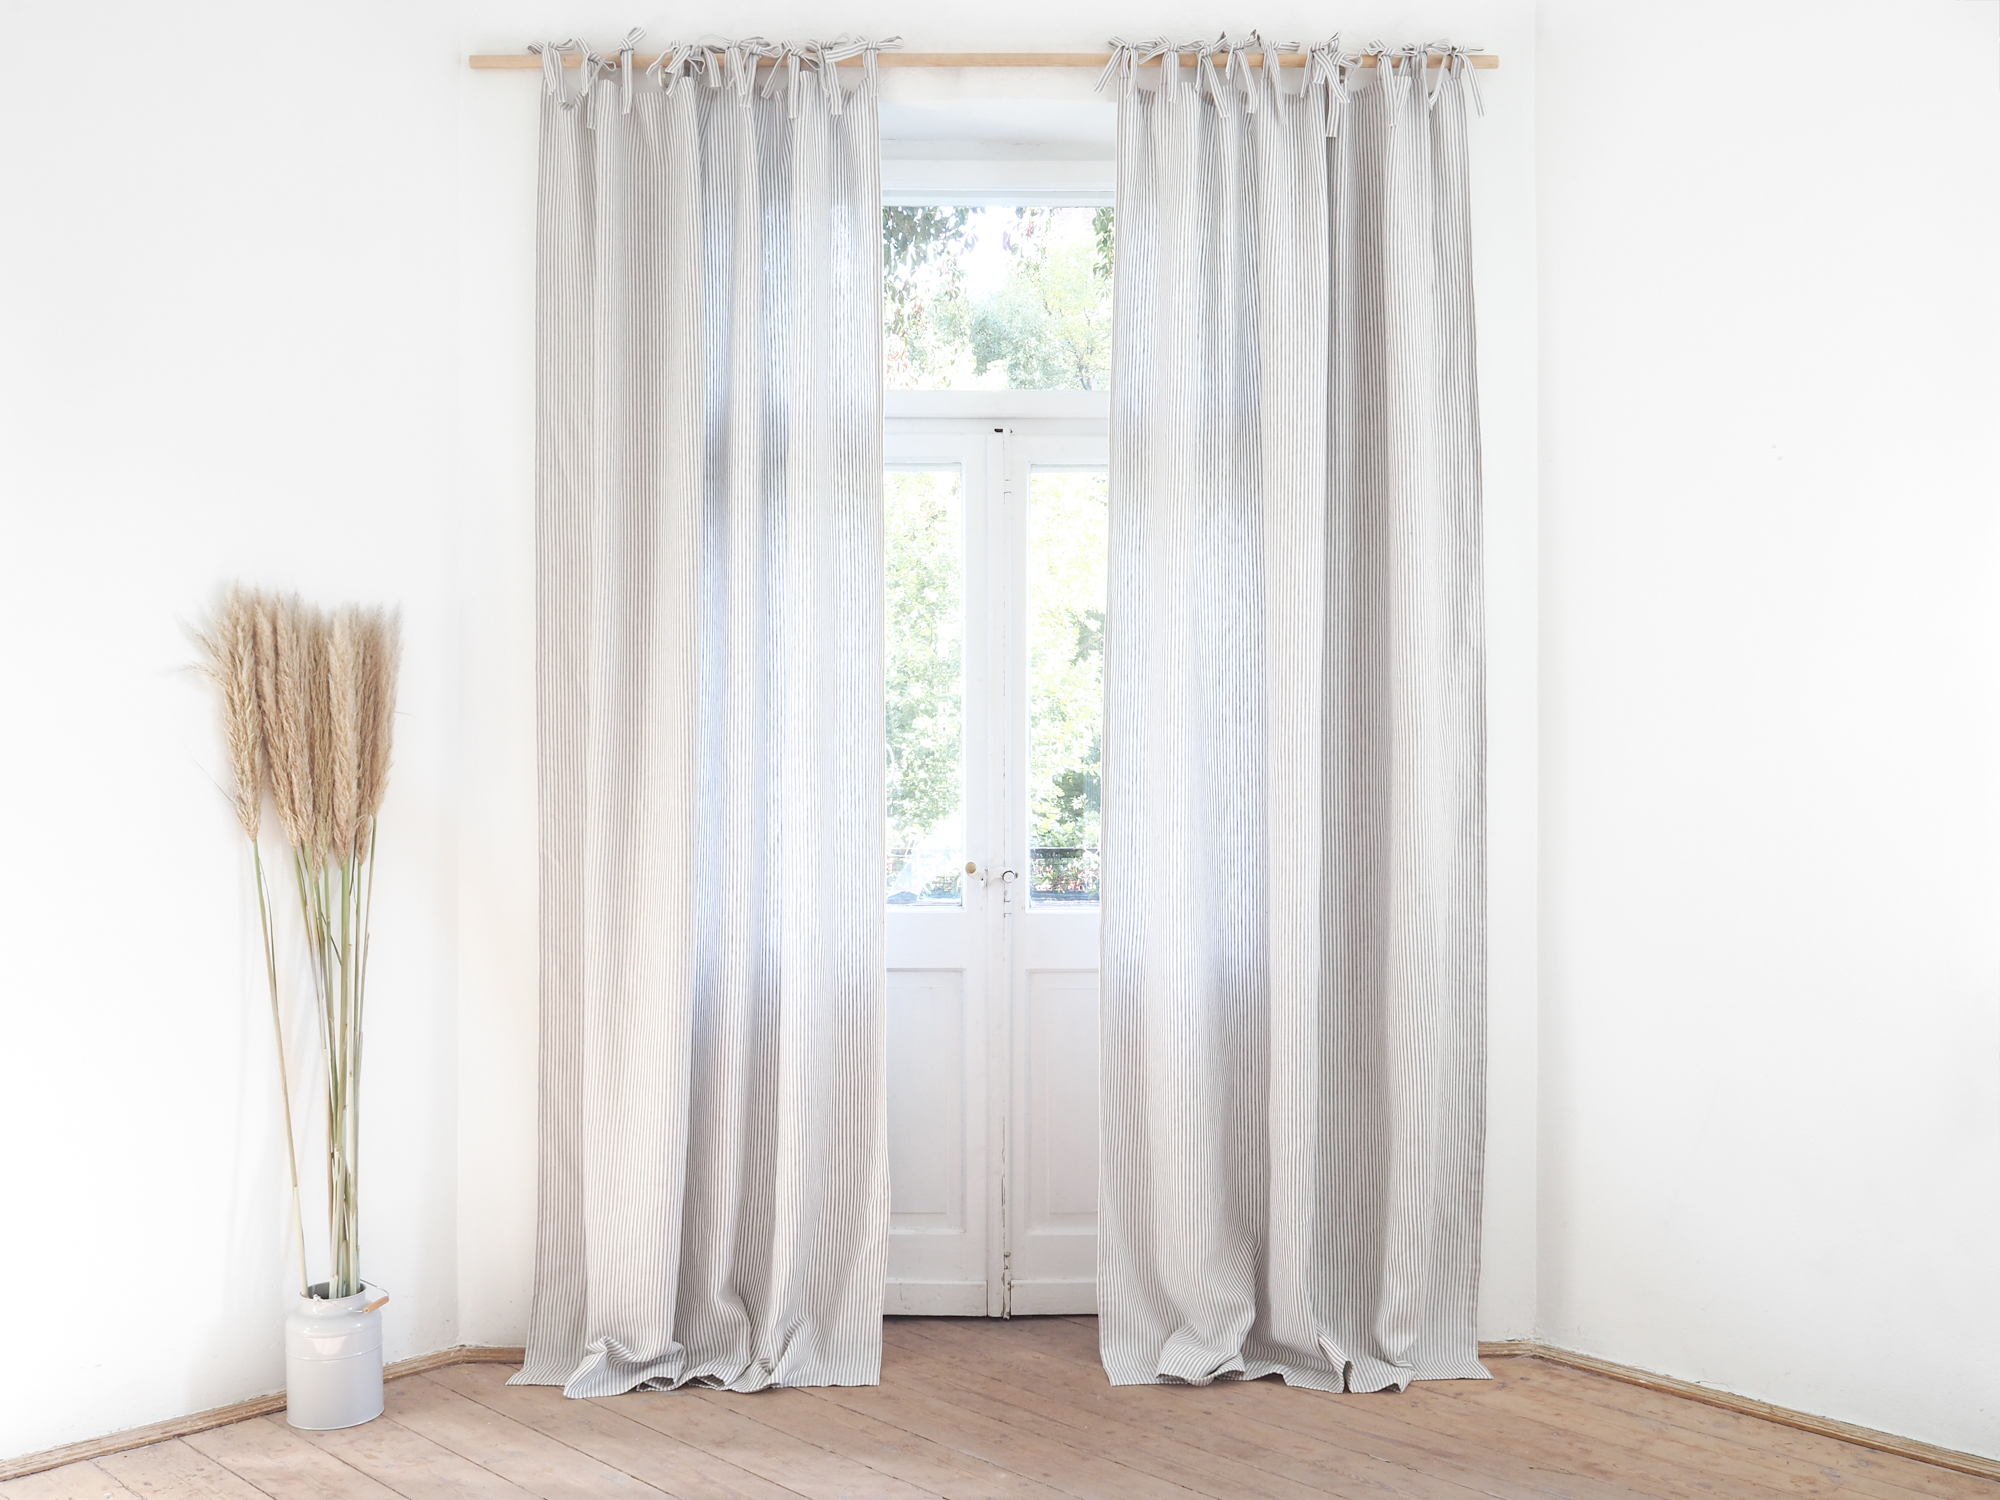 Striped tie top shading linen curtains